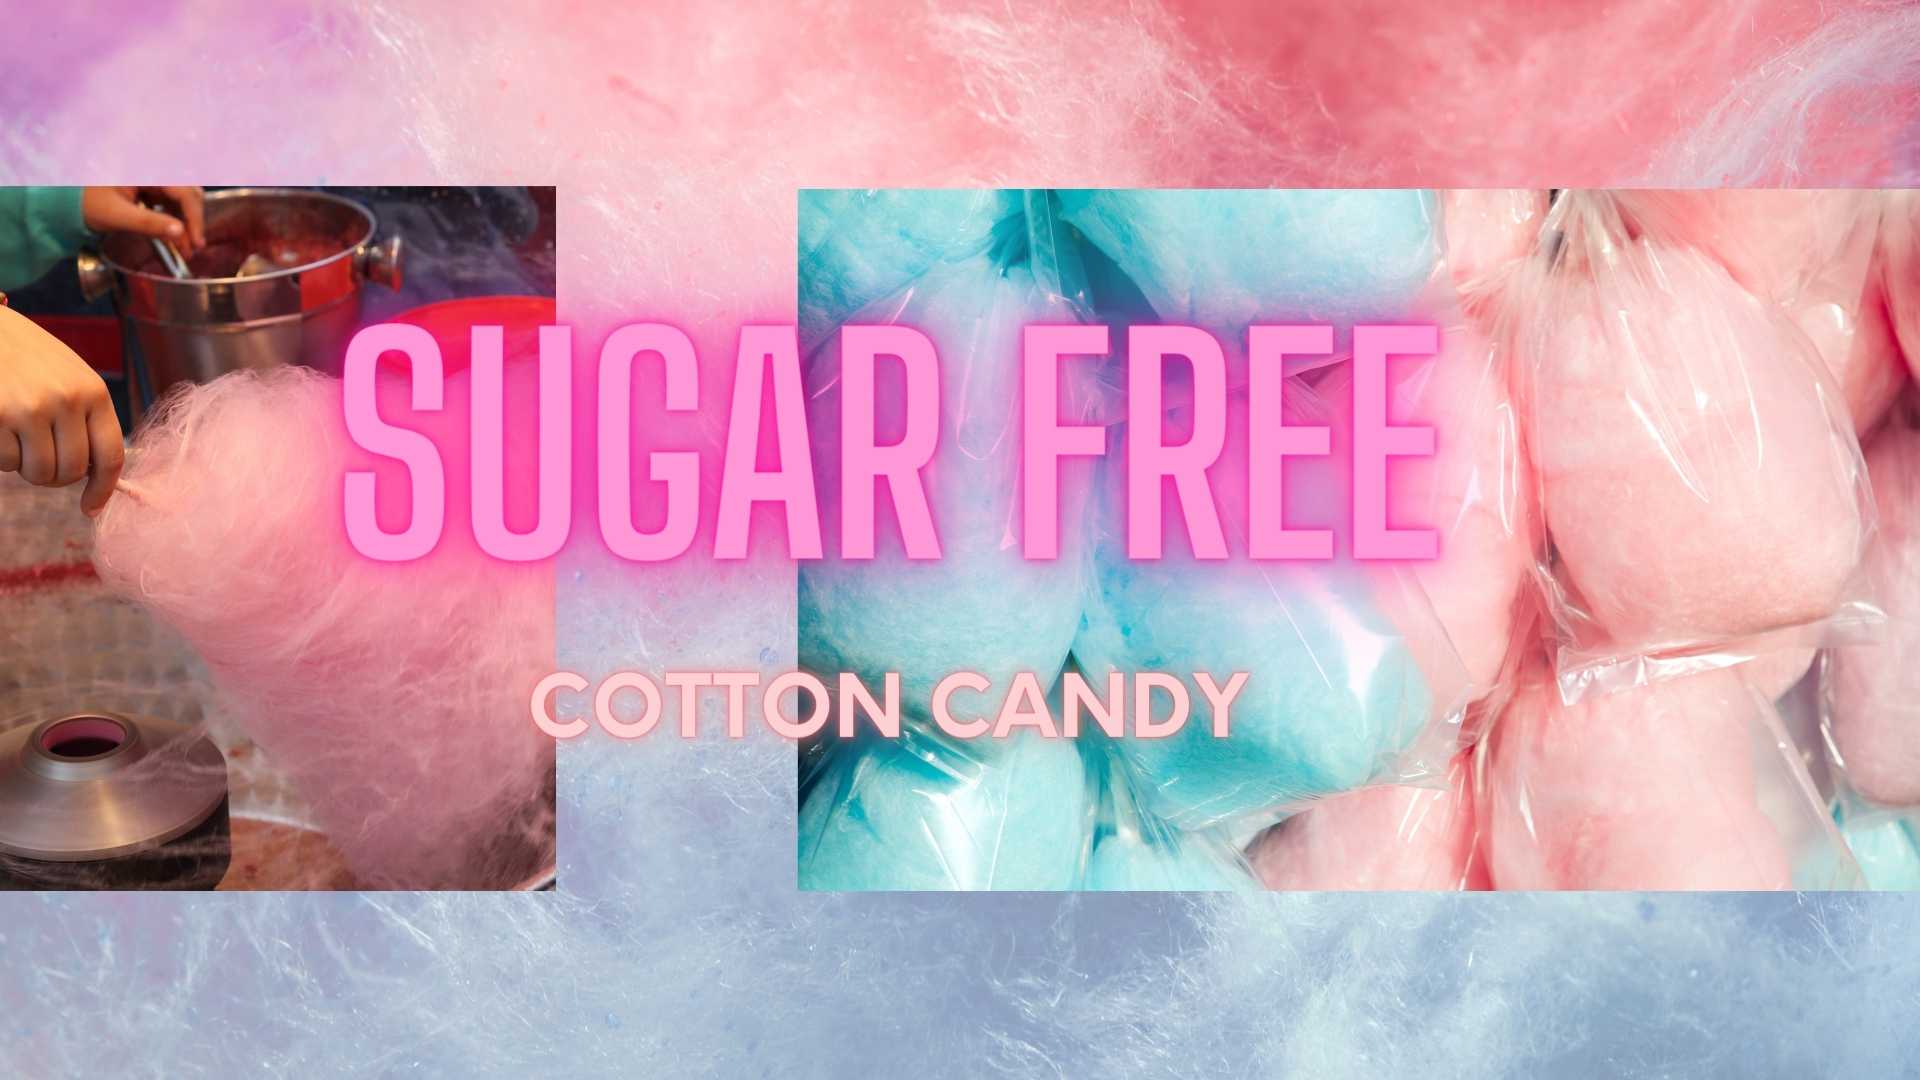 Best Sugar-Free Cotton Candy You must Try